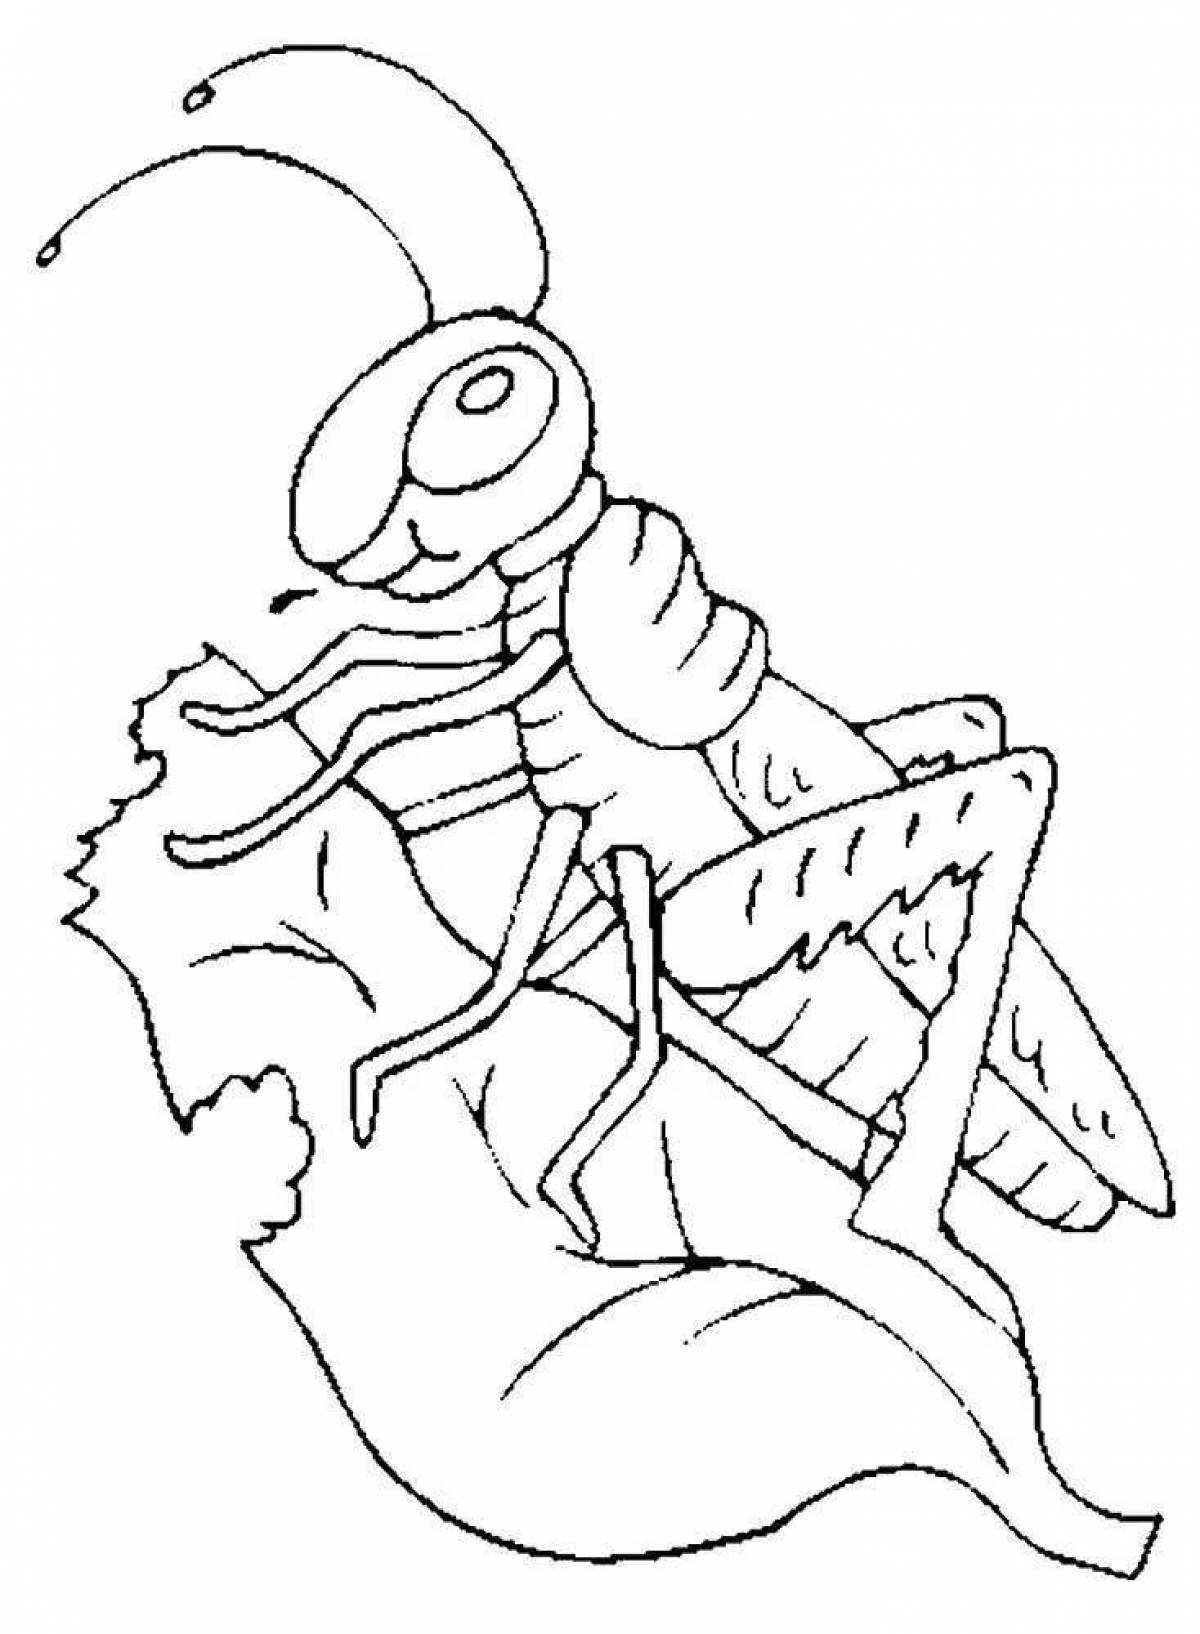 Playful grasshopper coloring page for kids